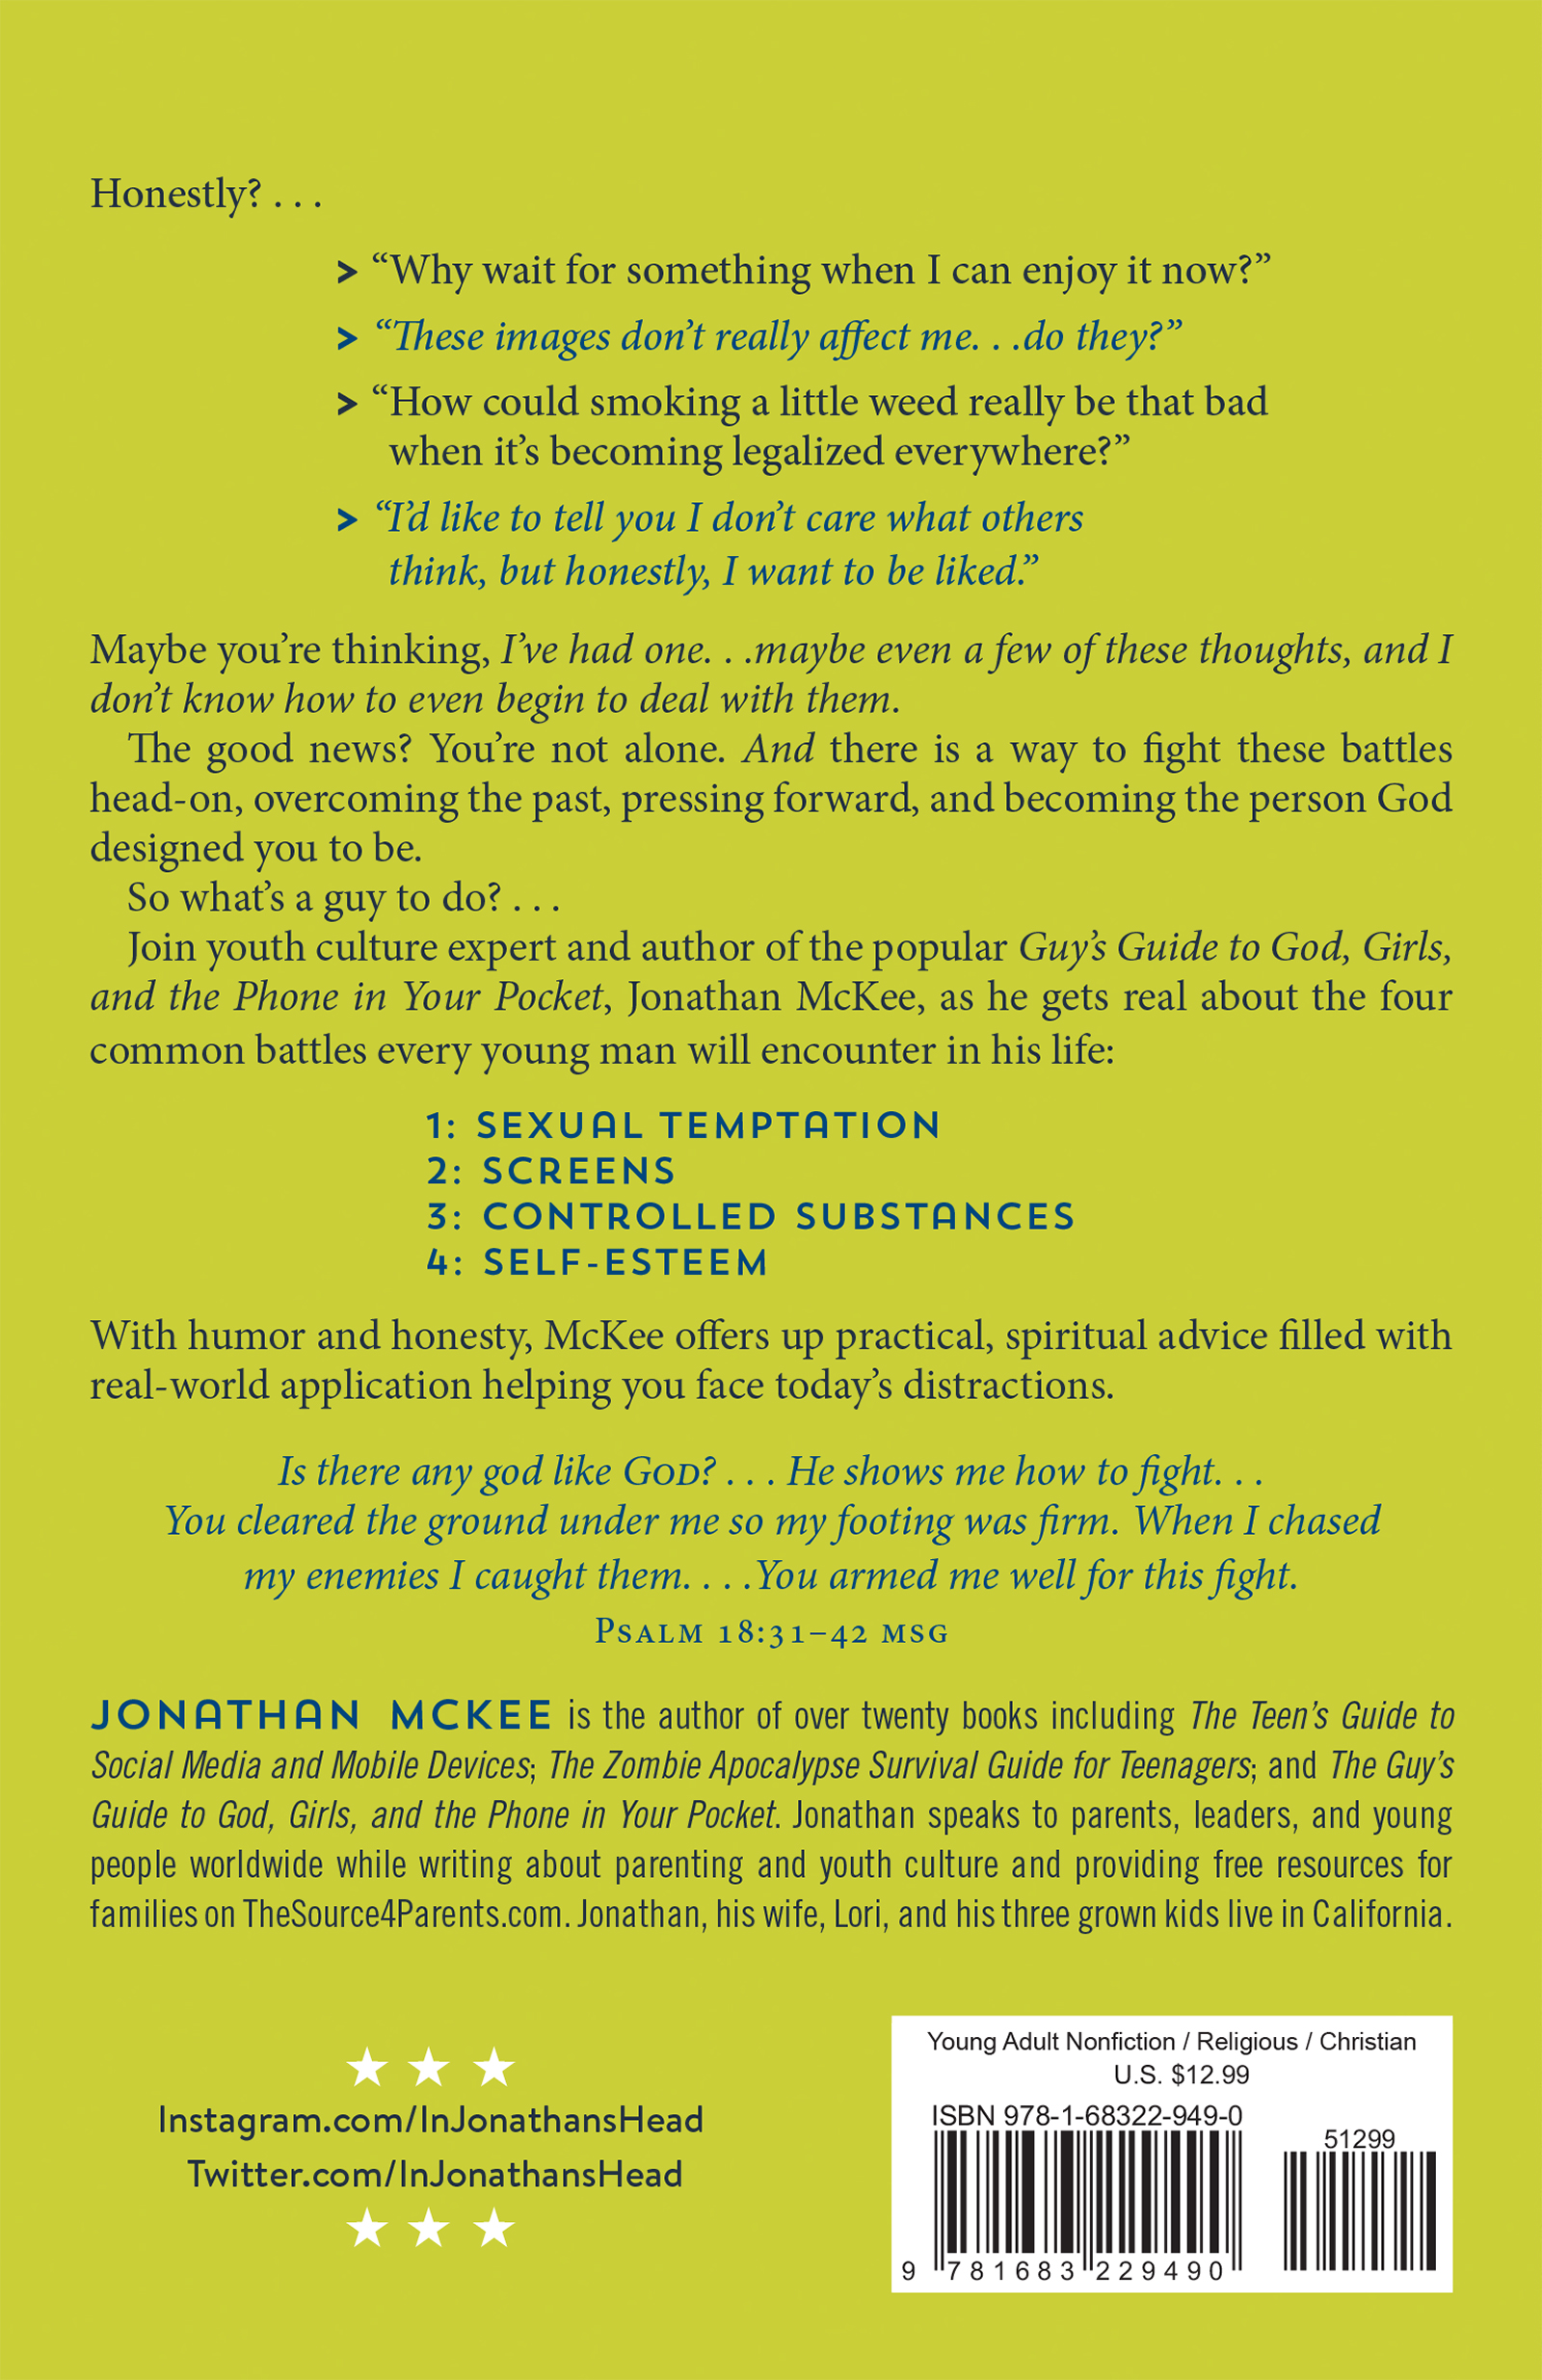 The Guy's Guide to Four Battles Every Young Man Must Face : a manual to overcoming life’s common distractions (Paperback) - image 3 of 6